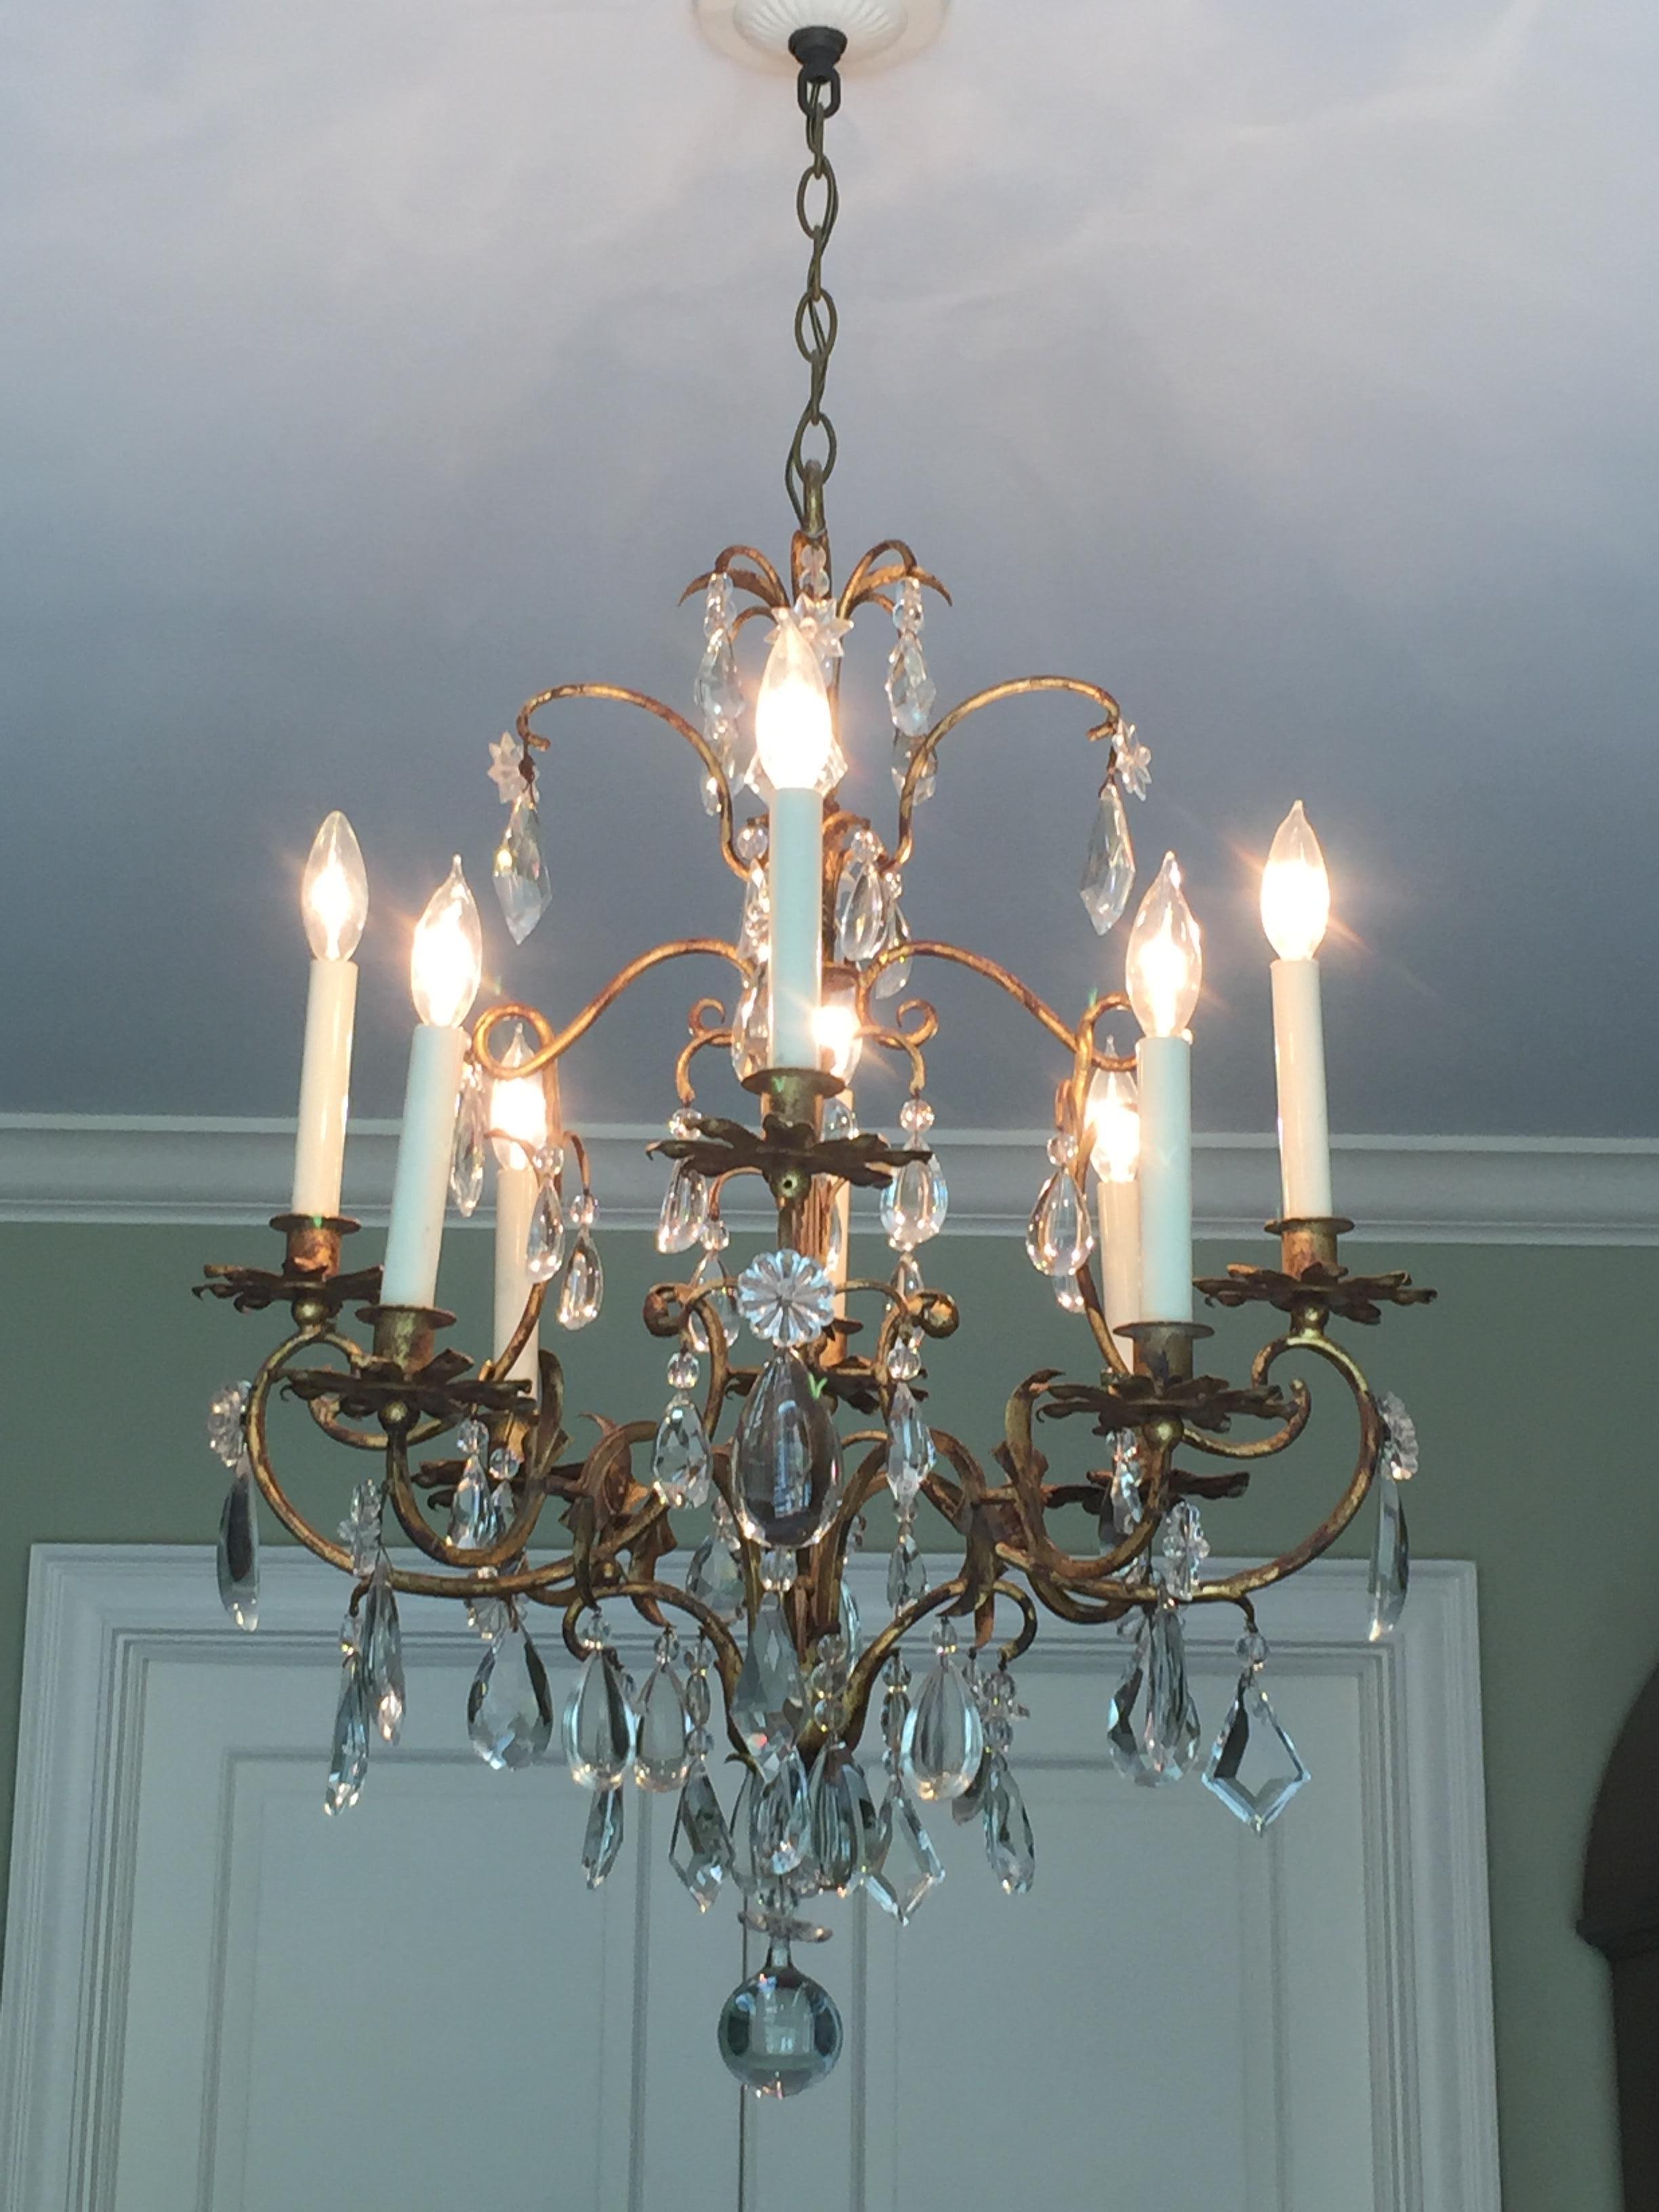 Mid-Century Italian iron and crystal chandelier with rich patina. Wired for use within the USA. We found this in a shop in Italy; fell in love, and had it crated and shipped home. It added another elegant layer to our dining room. But would be